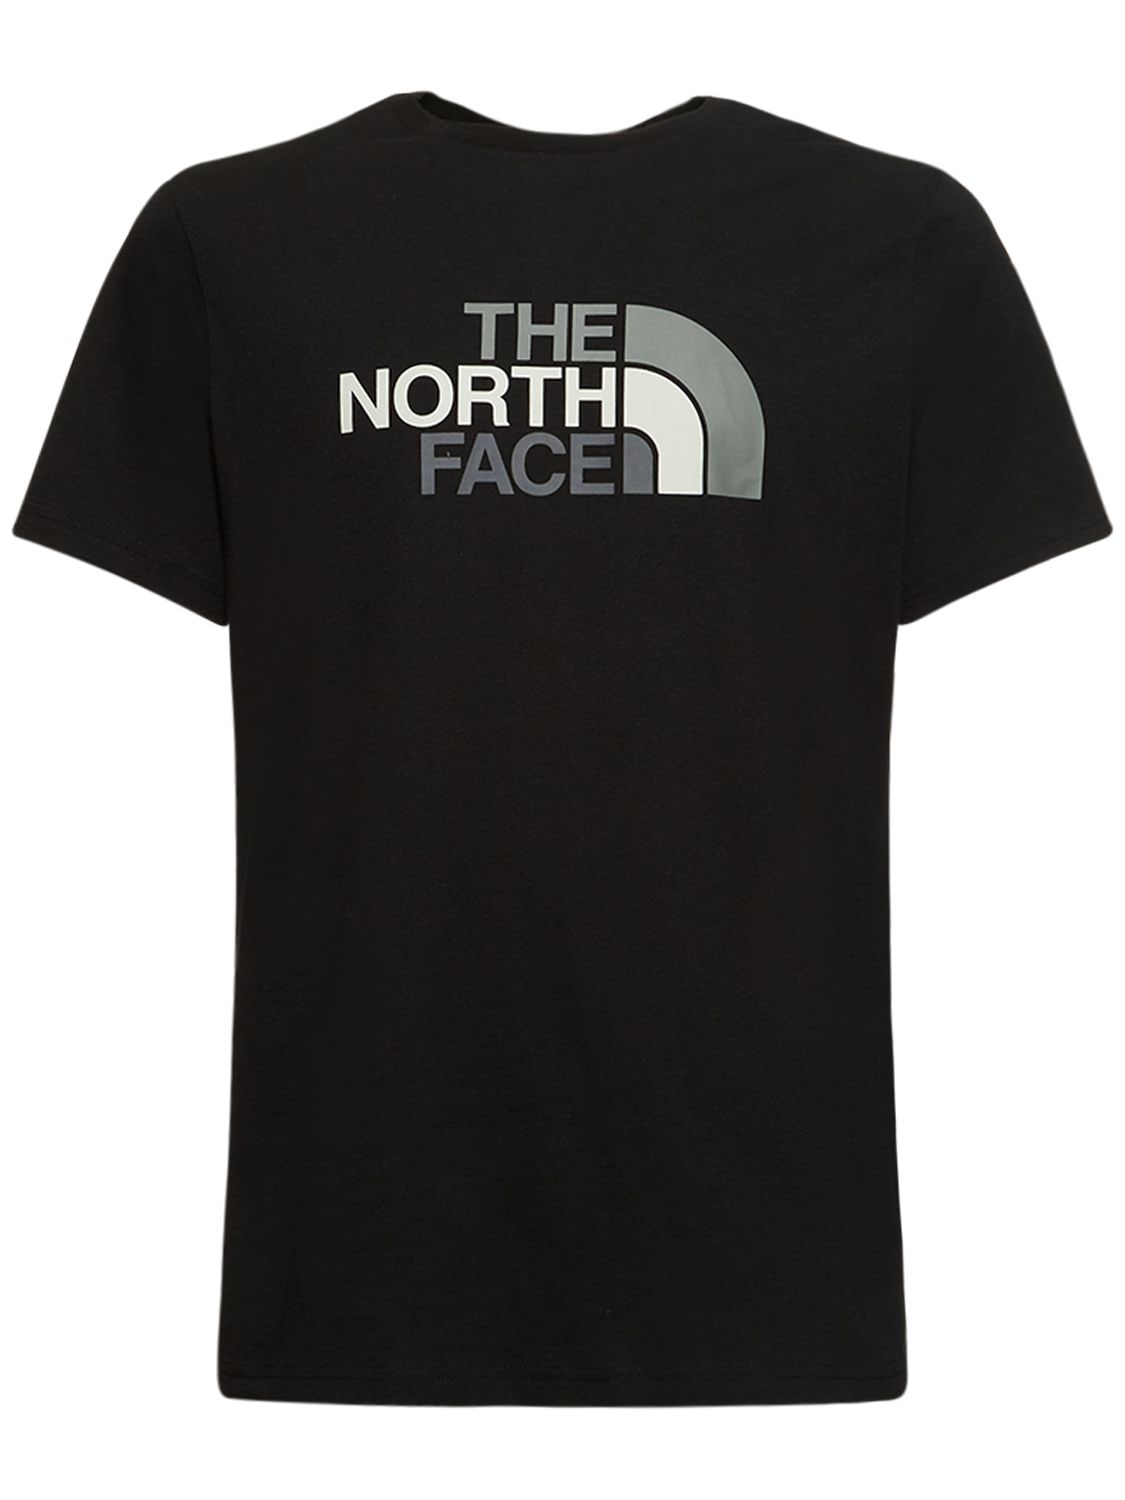 THE NORTH FACE LOGO COTTON T-SHIRT